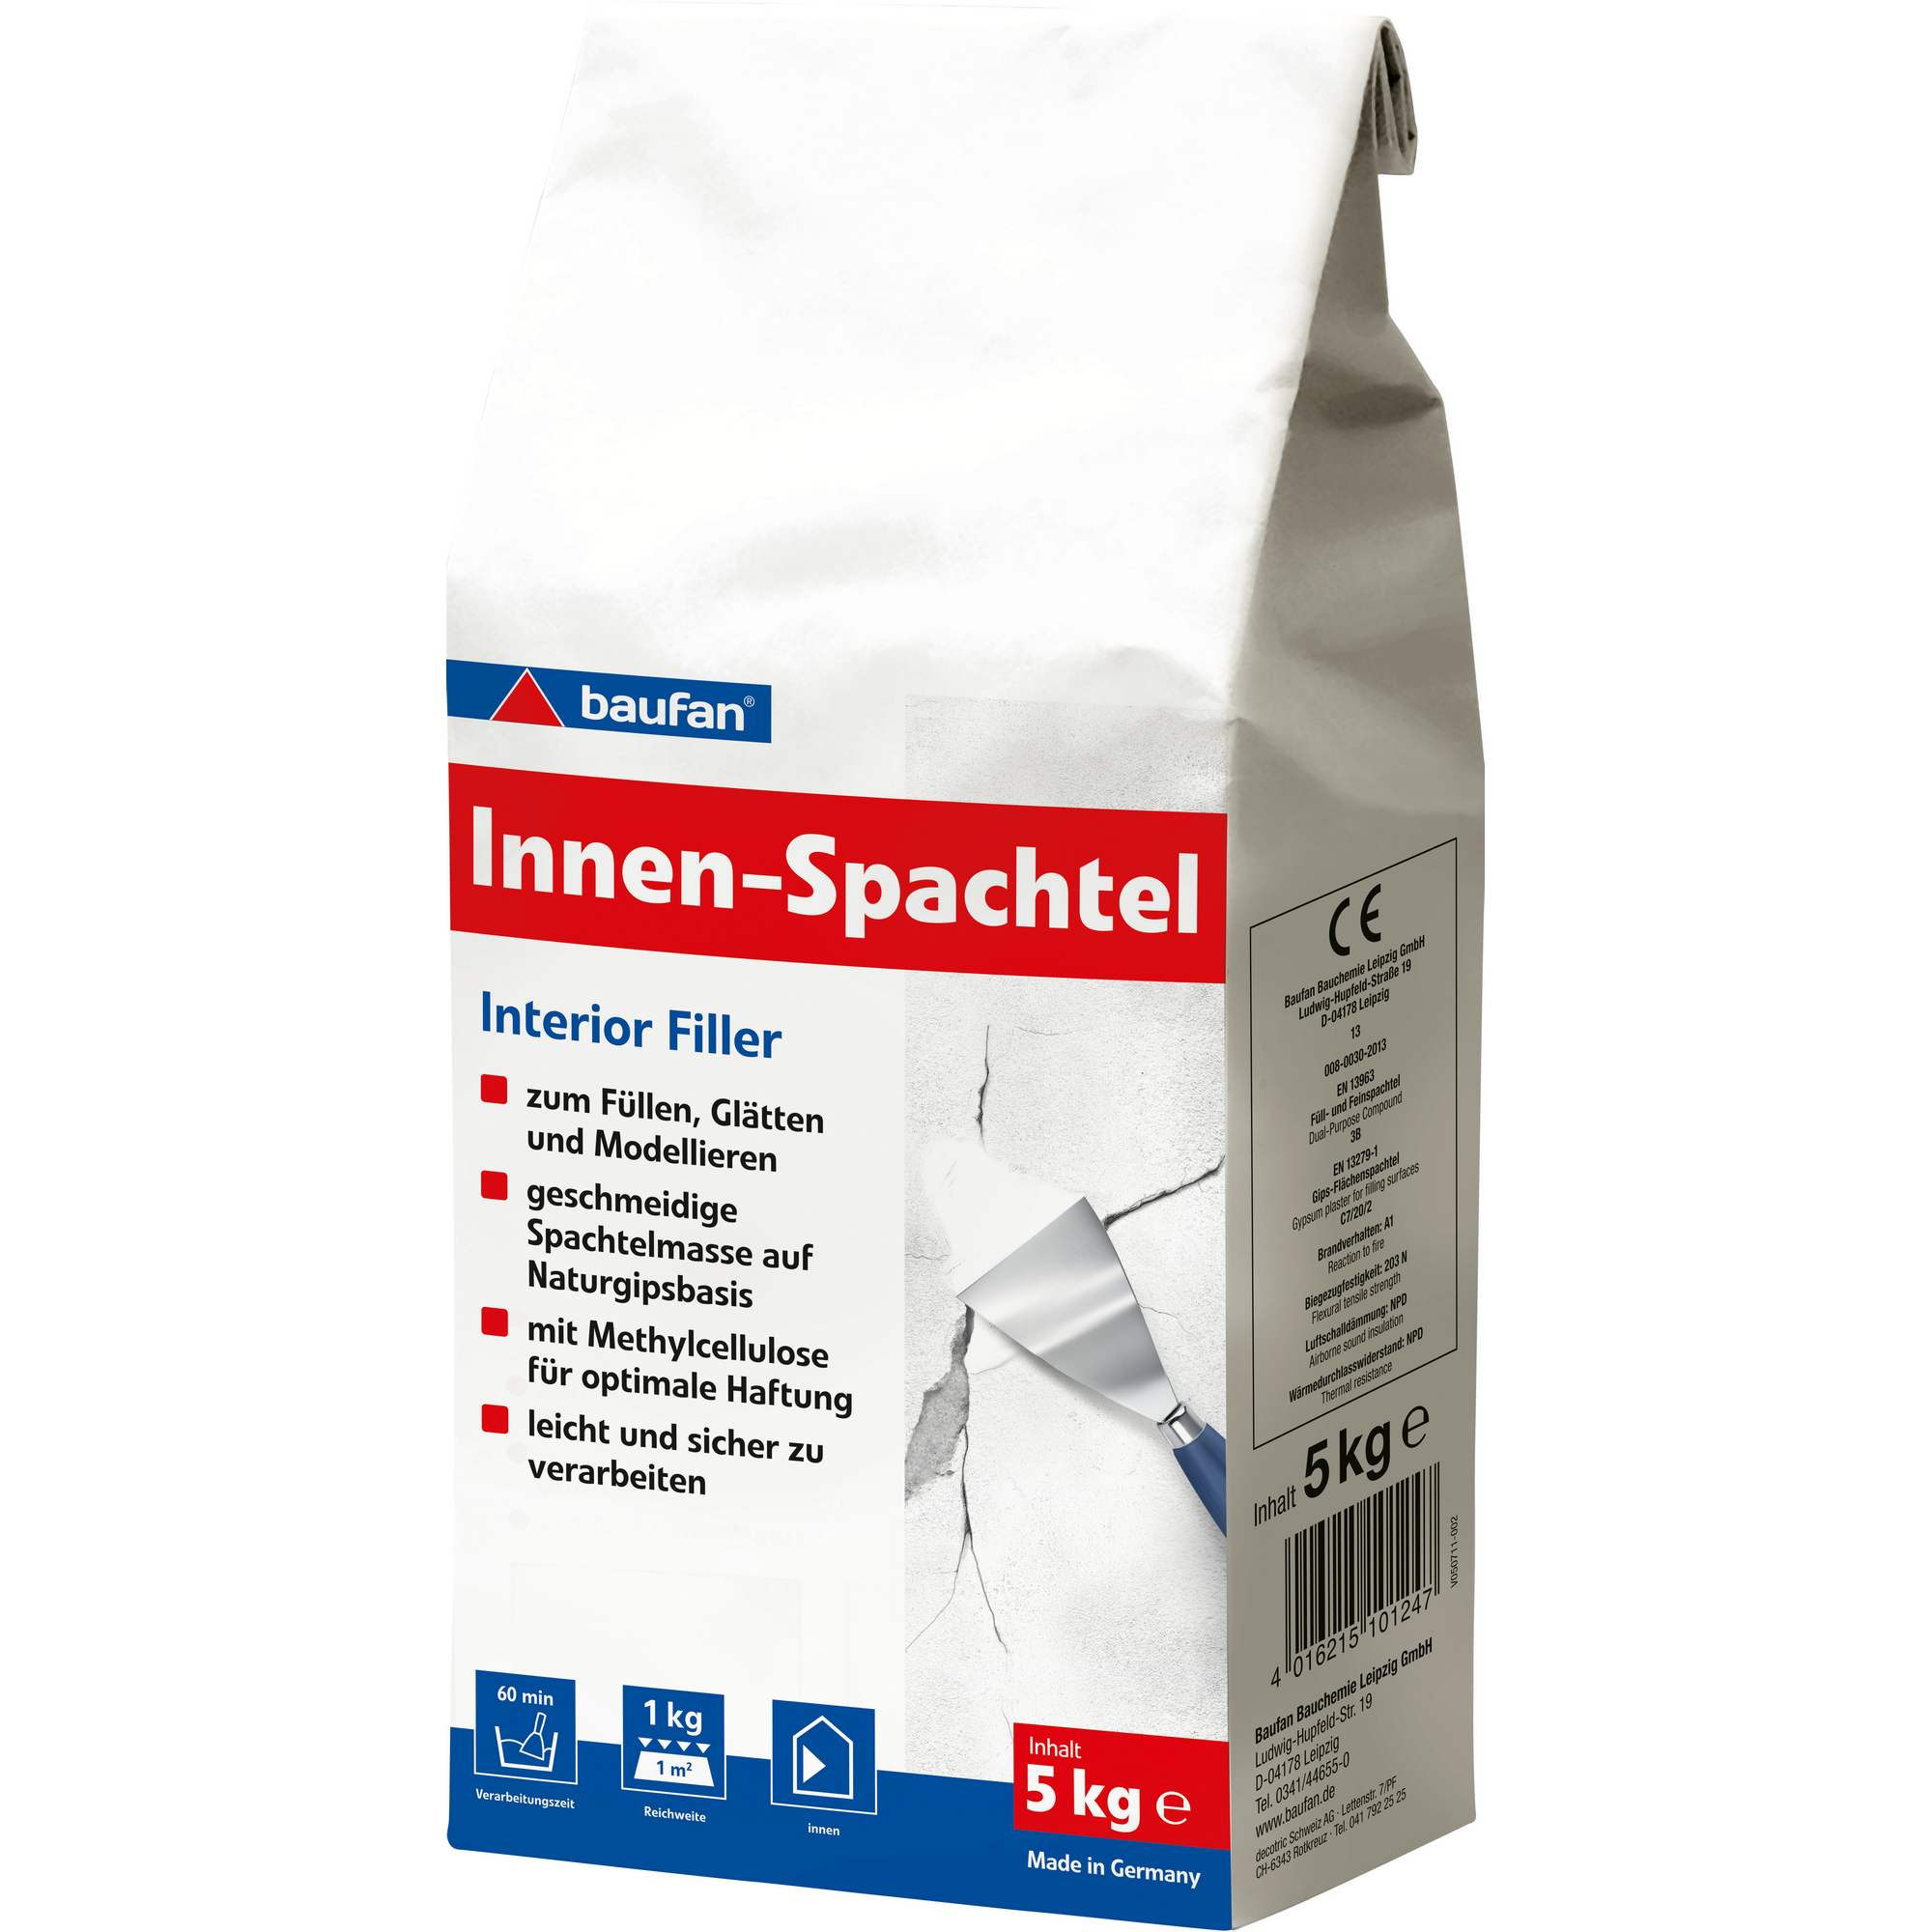 Innenspachtel 5 kg + product picture